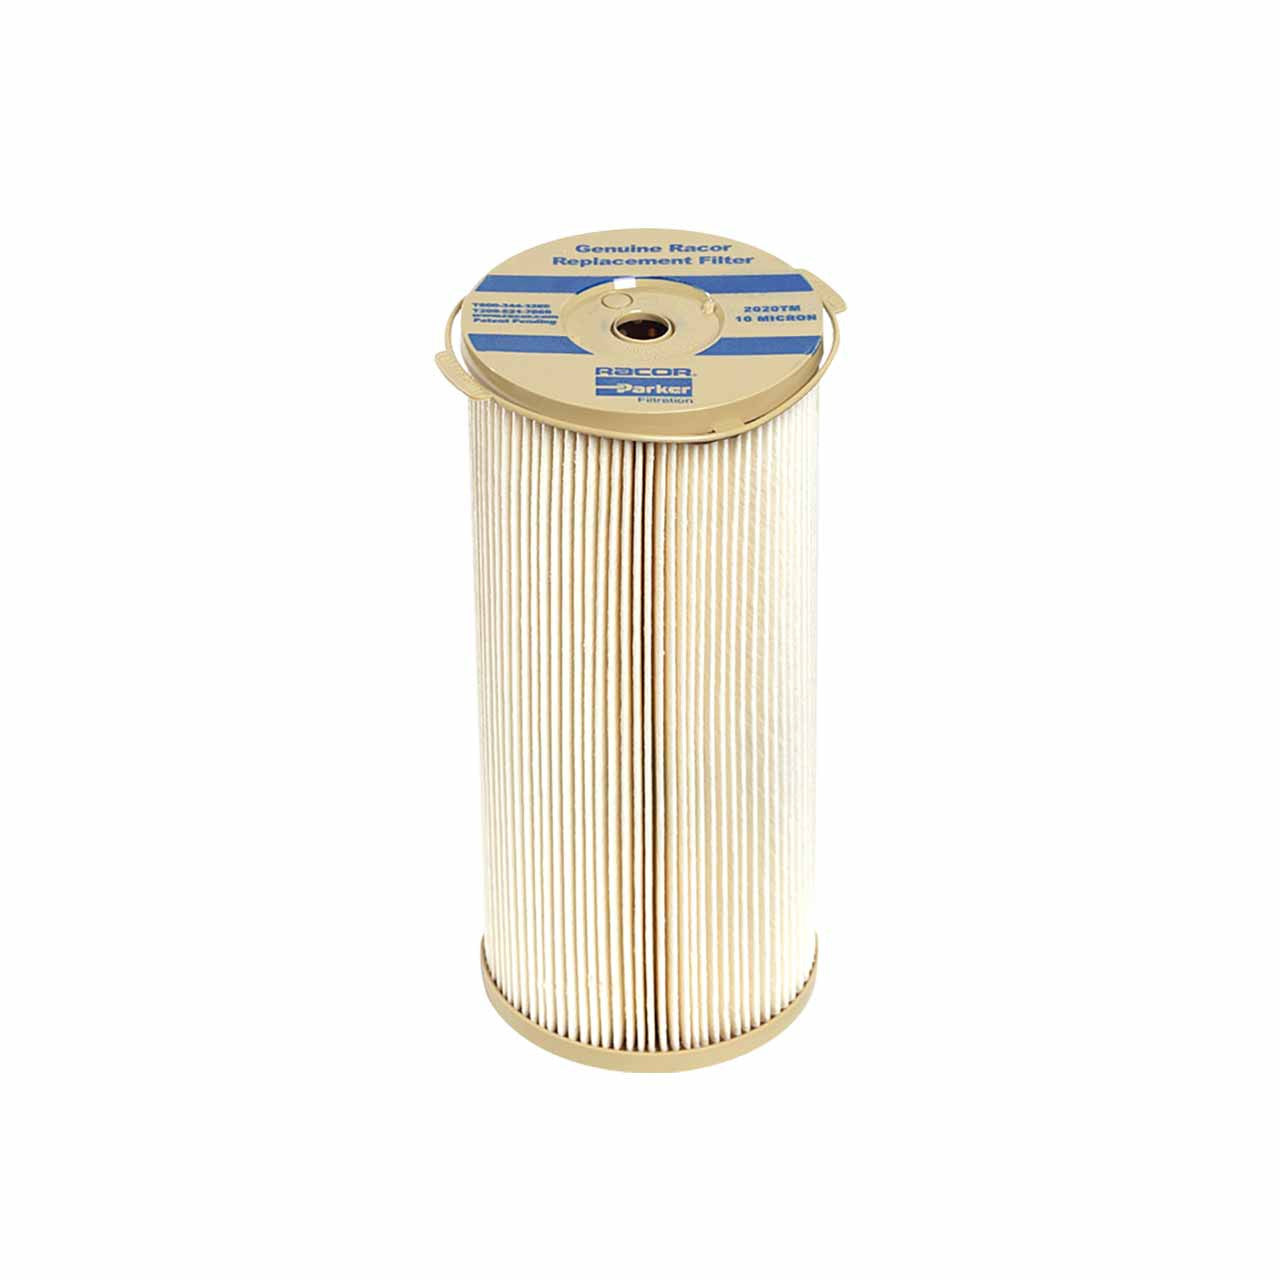 2020N-10 Racor Parker Replacement Filter Element (10 micron) 1000 Turbine Series